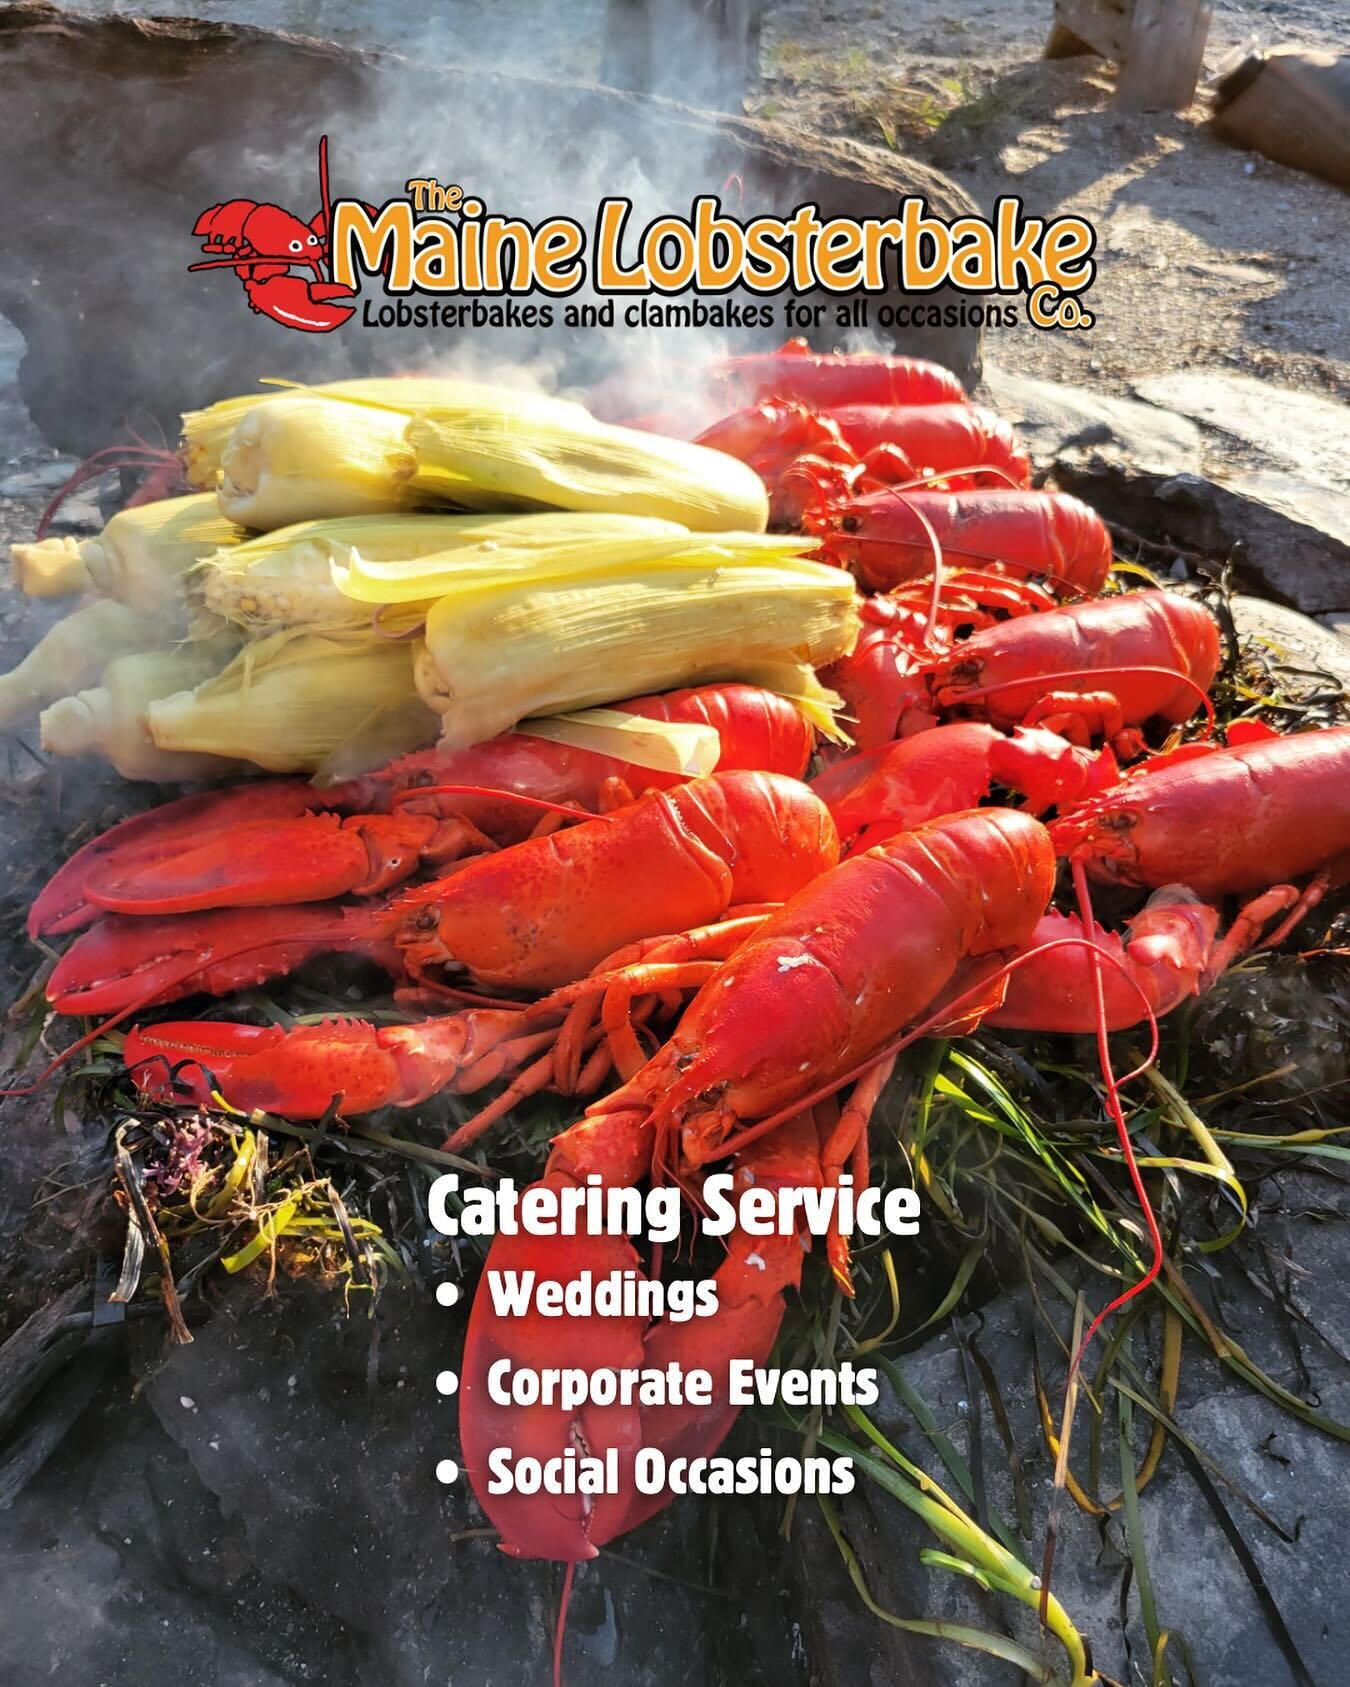 250+ wedding guests list? ✅ 
1,000+ employee appreciation party? ✅
75+ person family reunion? ✅

All with dietary restrictions? 🤯 We&rsquo;ve got it ALL covered. Seriously, this isn&rsquo;t our first lobster bake. Trust the professionals and sit bac